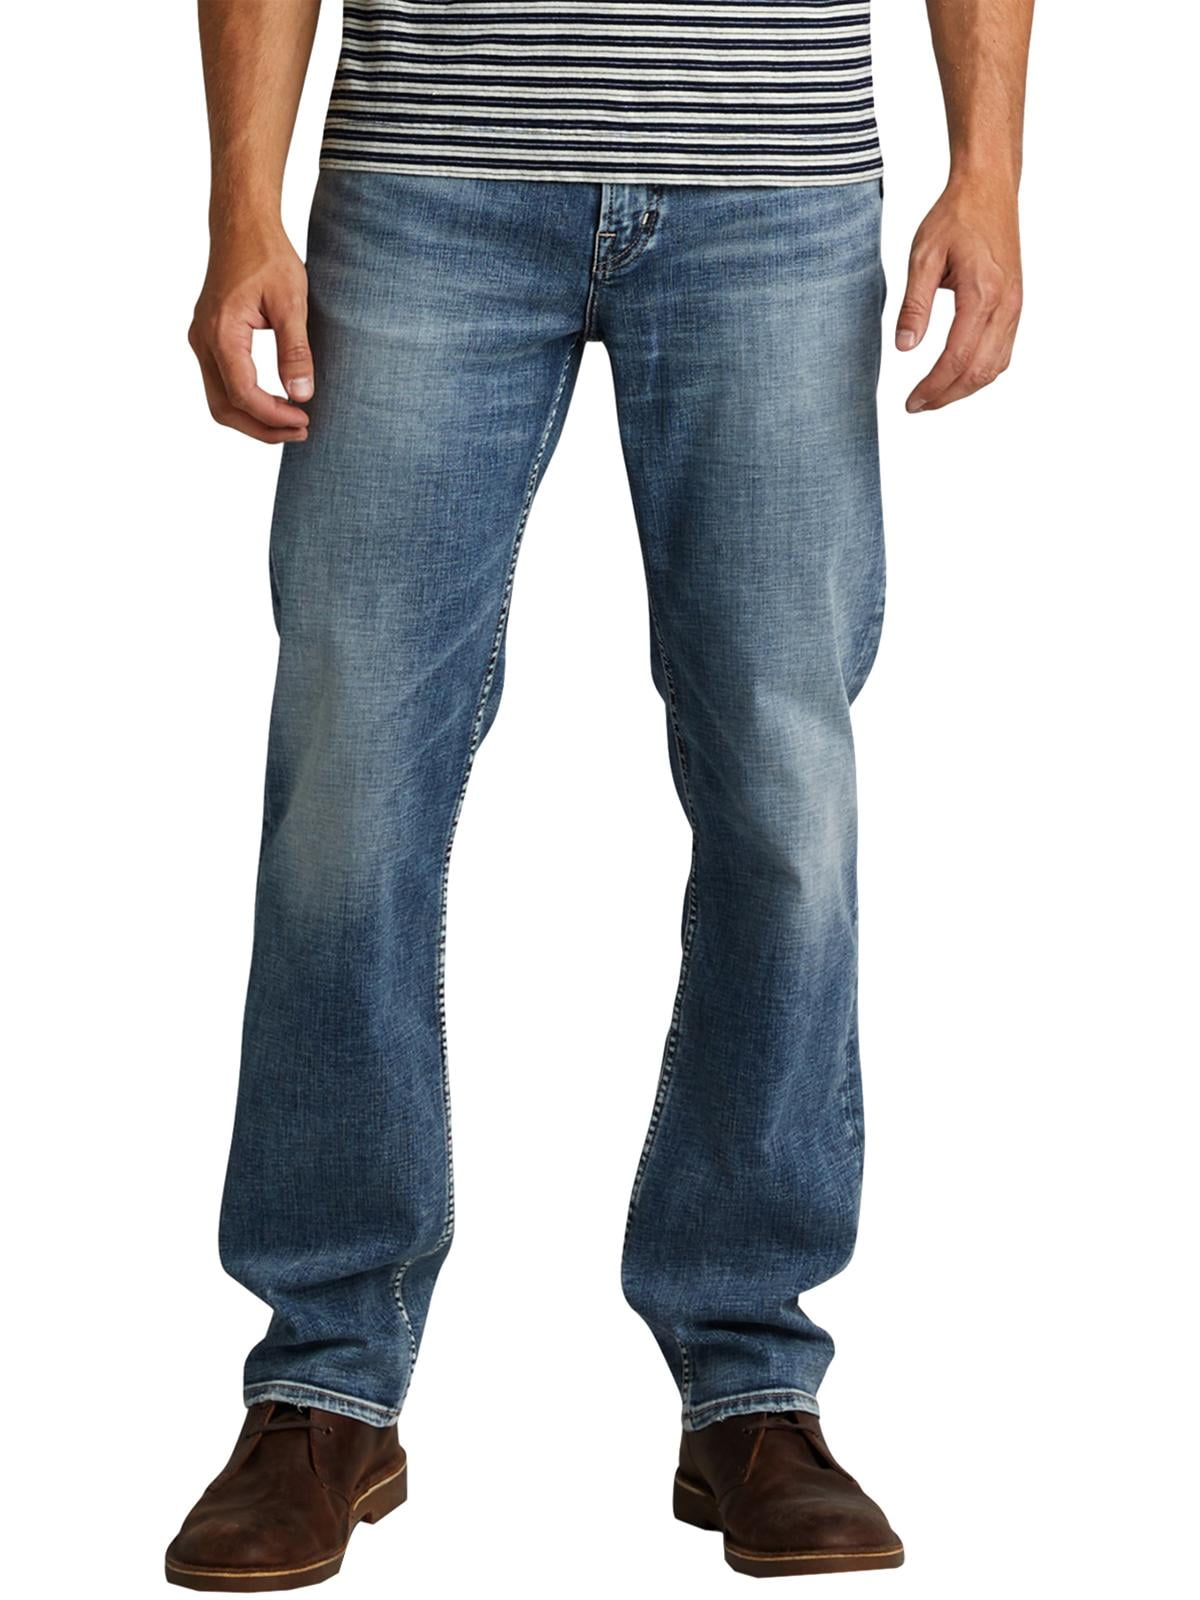 Silver Jeans - Silver Jeans Co. Mens Grayson Denim Easy Fit Straight ...